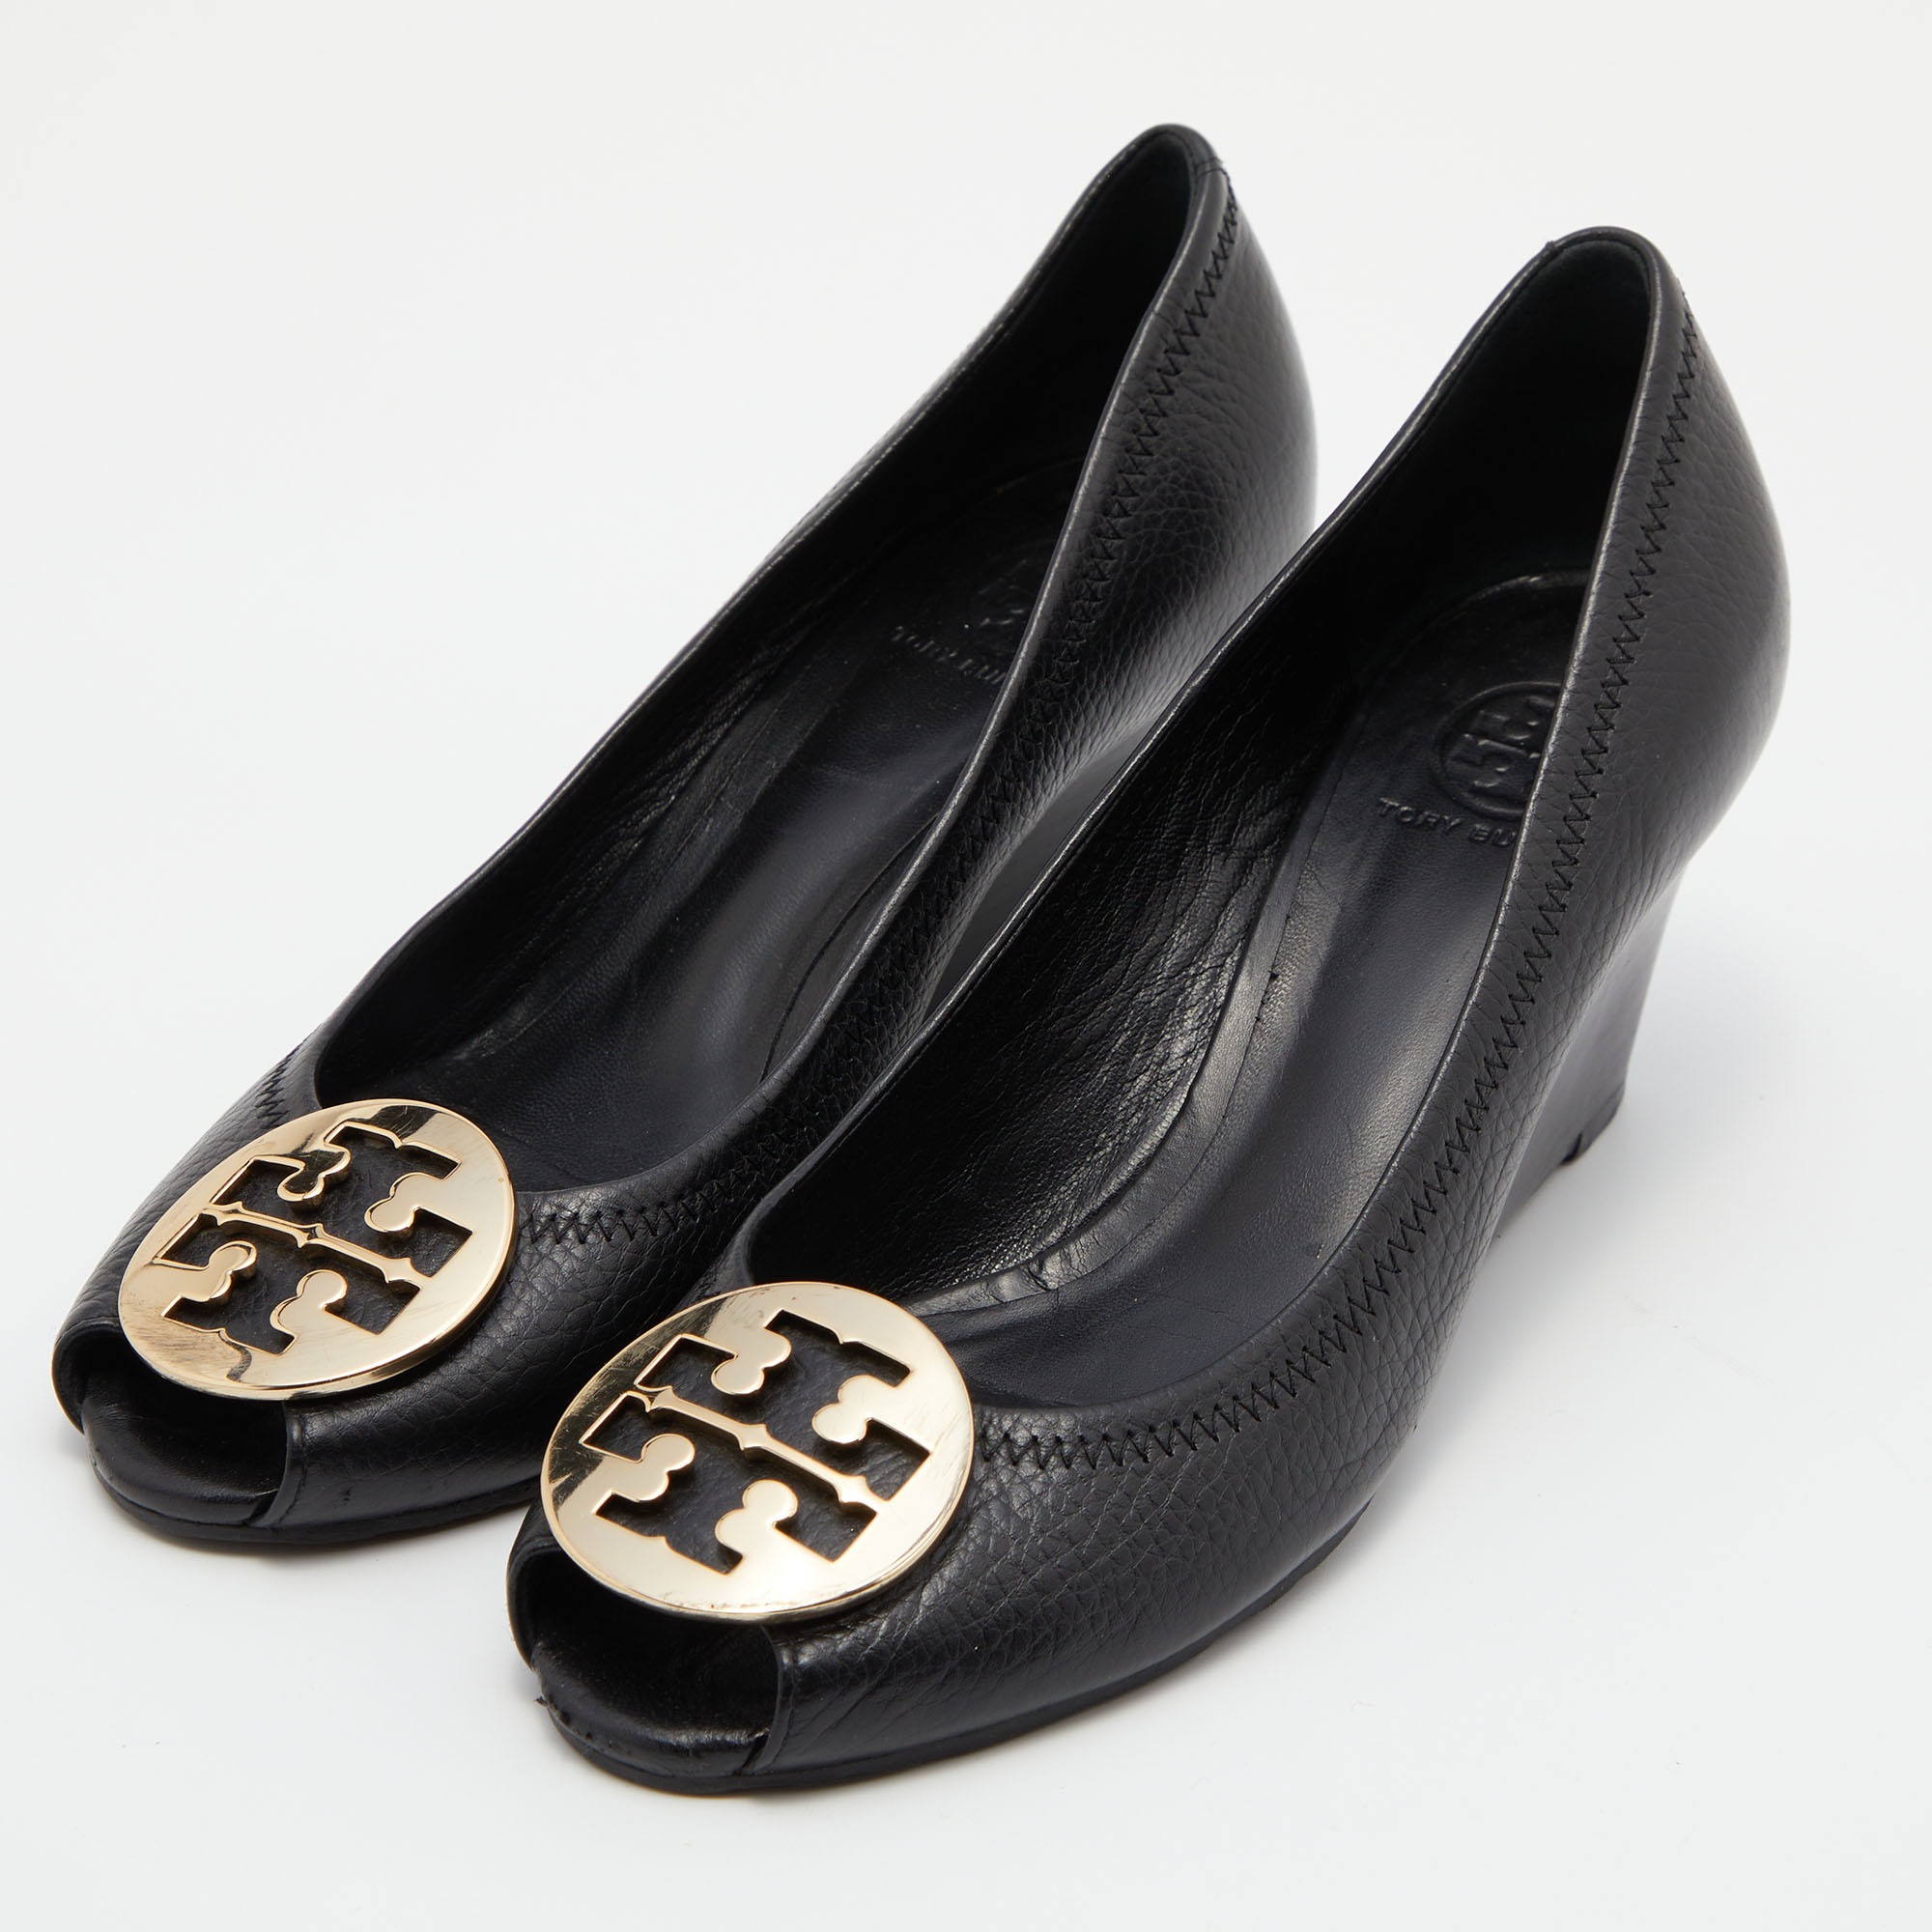 

Tory Burch Black Leather Sophie Peep-Toe Wedge Pumps Size